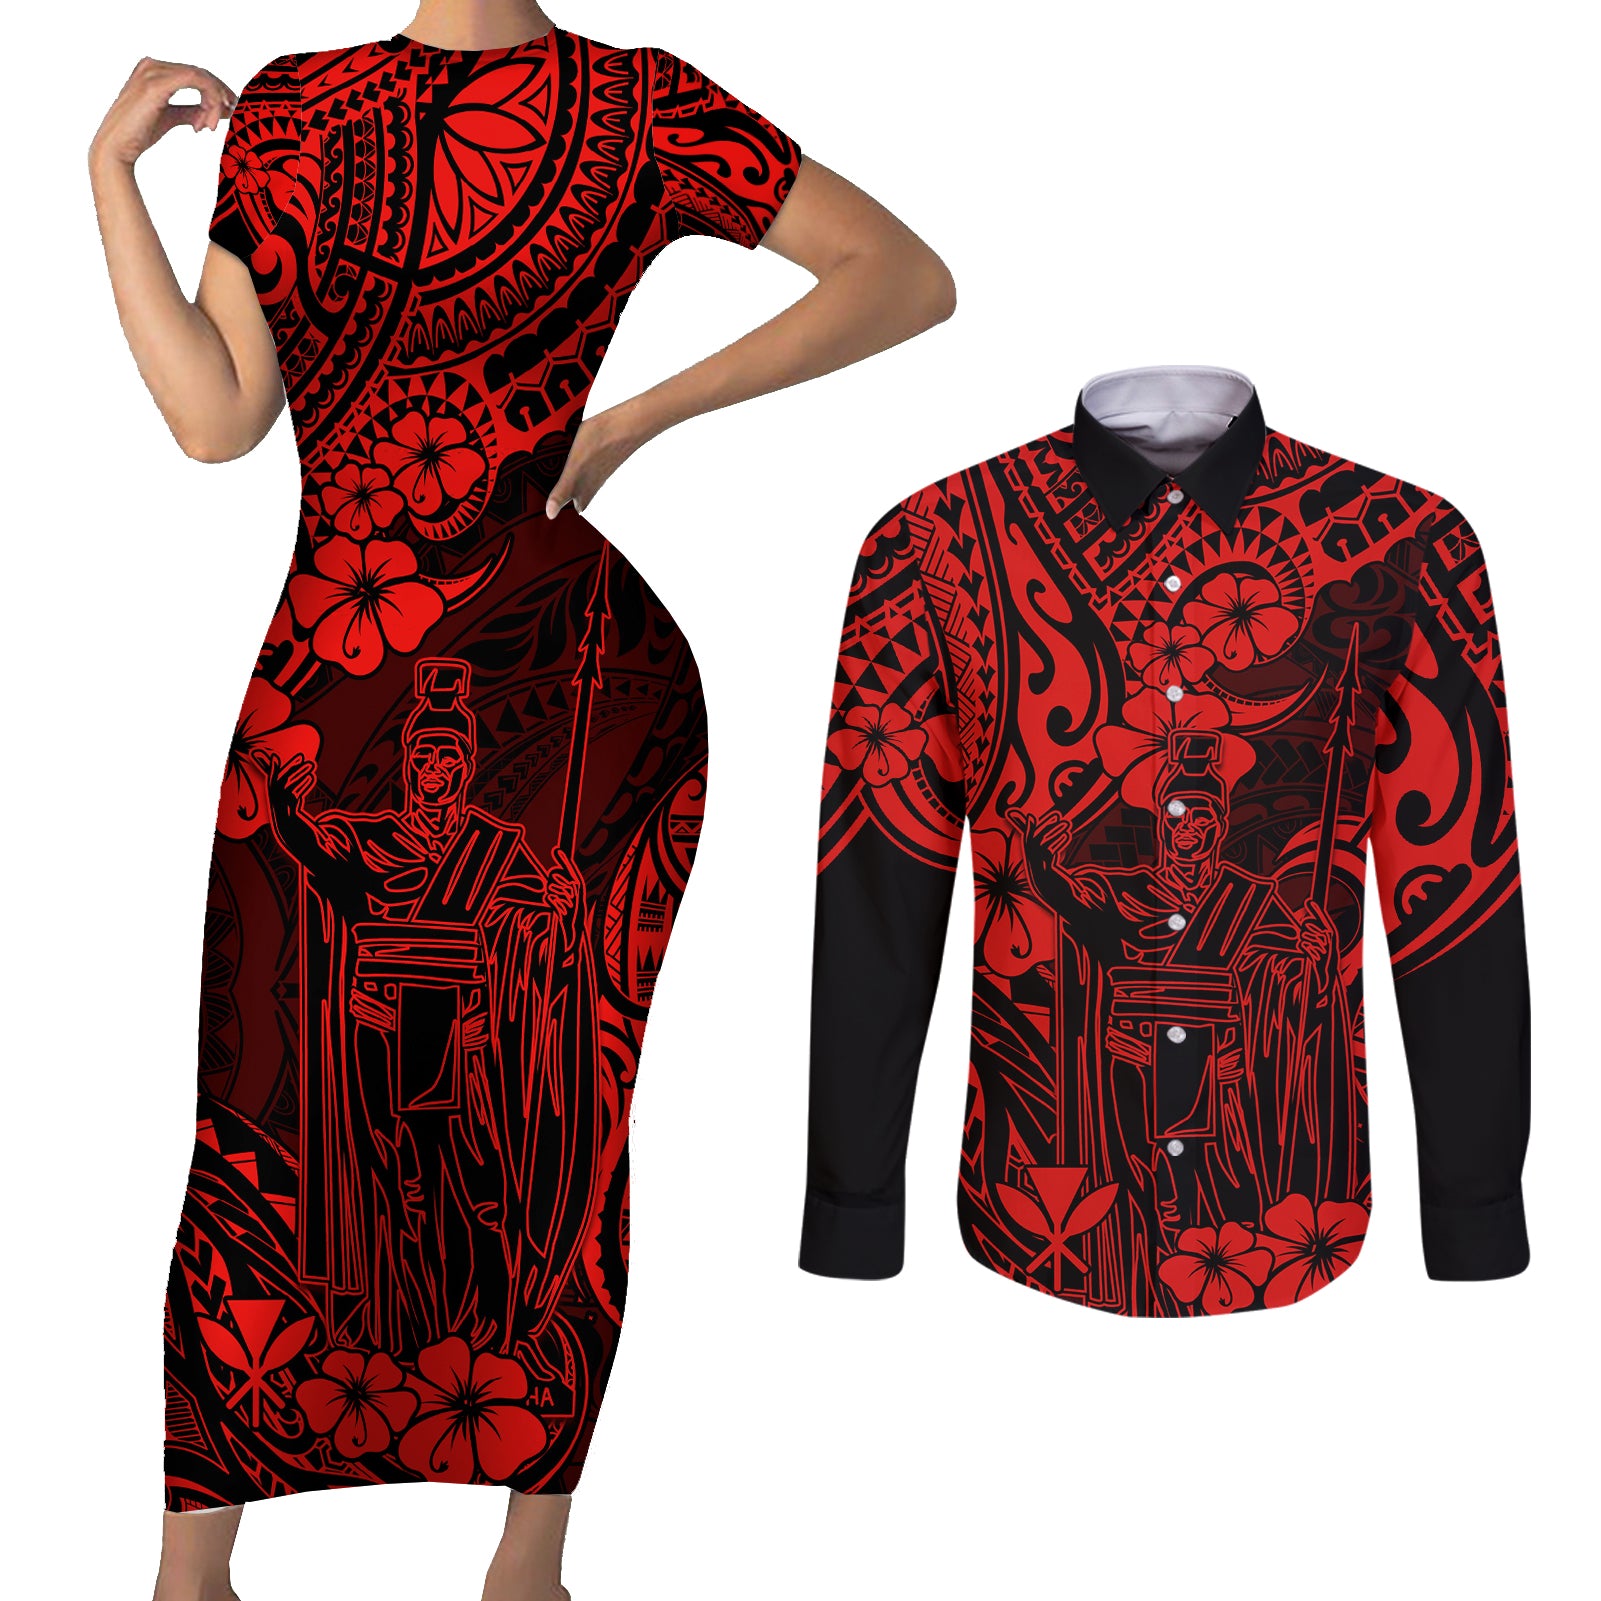 Hawaii King Kamehameha Couples Matching Short Sleeve Bodycon Dress and Long Sleeve Button Shirts Polynesian Pattern Red Version LT01 Red - Polynesian Pride